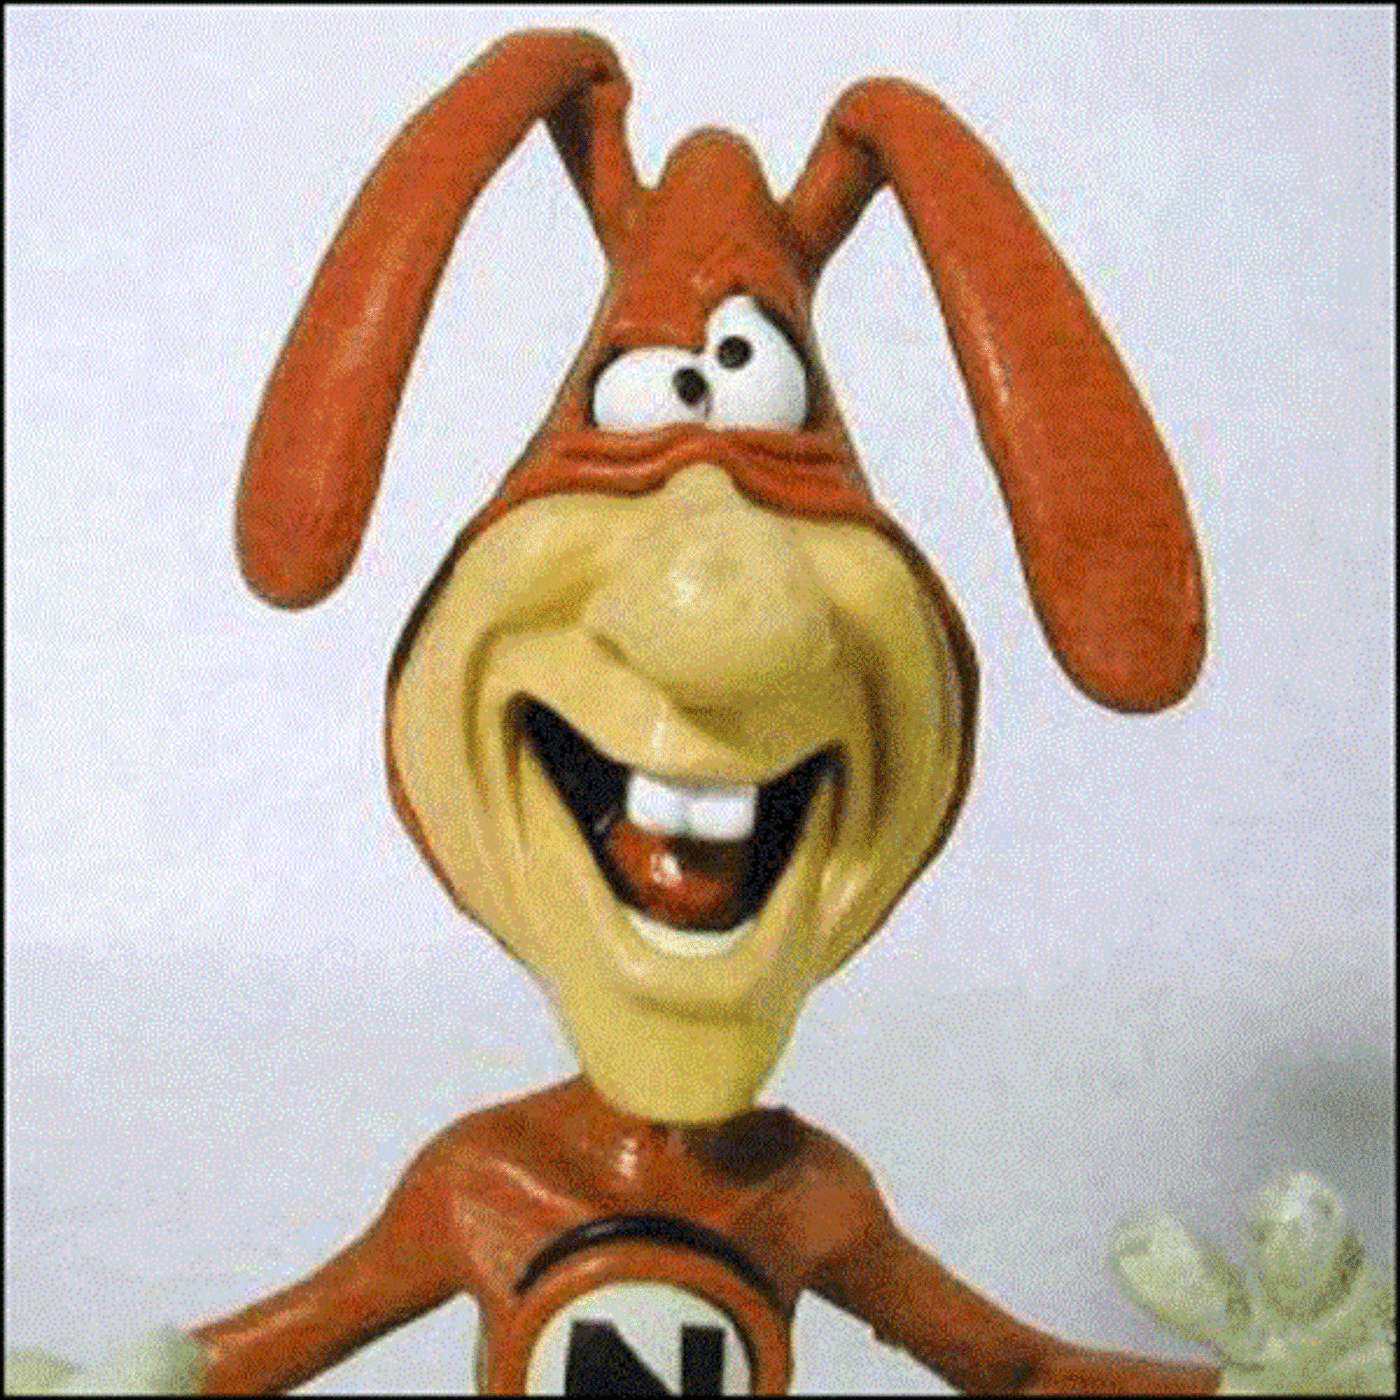 Episode 25 - The Noid